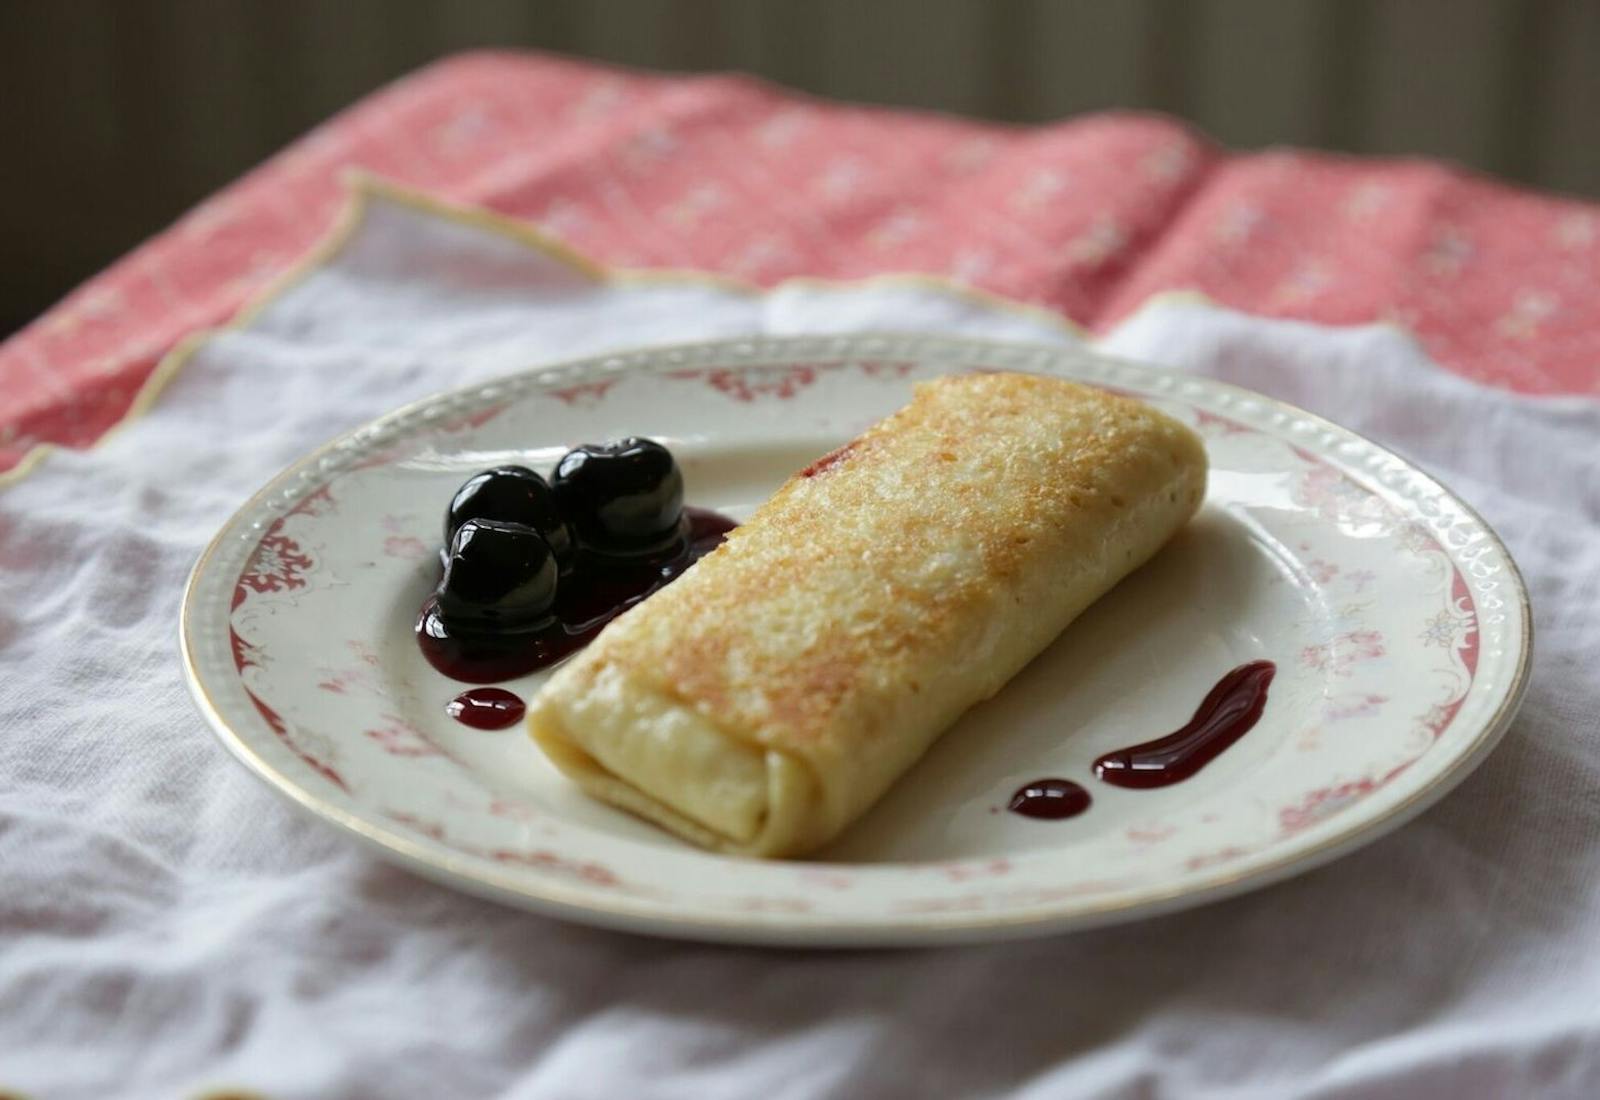 Cheese blintzes with dollop of cherry compote on small dish atop white and pink cloths.